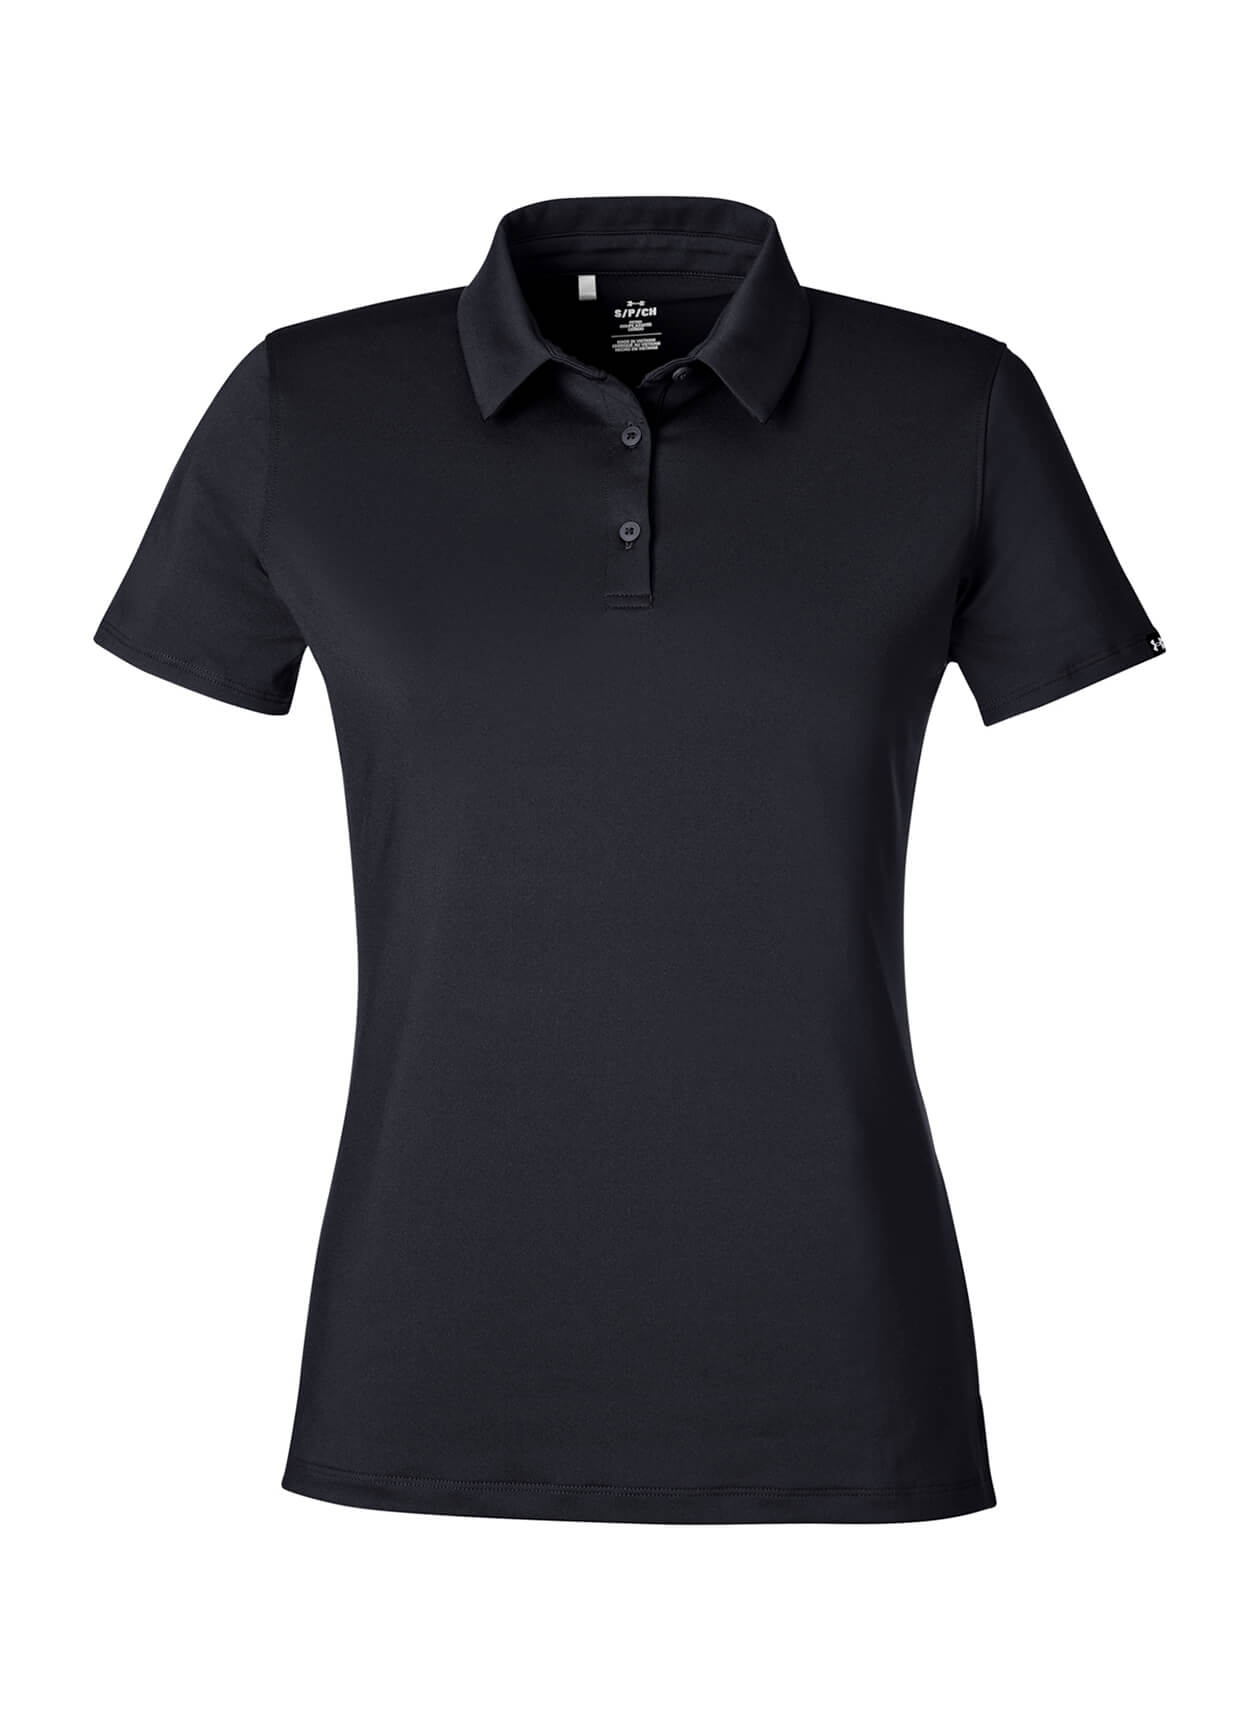 Under Armour Women's Black Recycled Polo